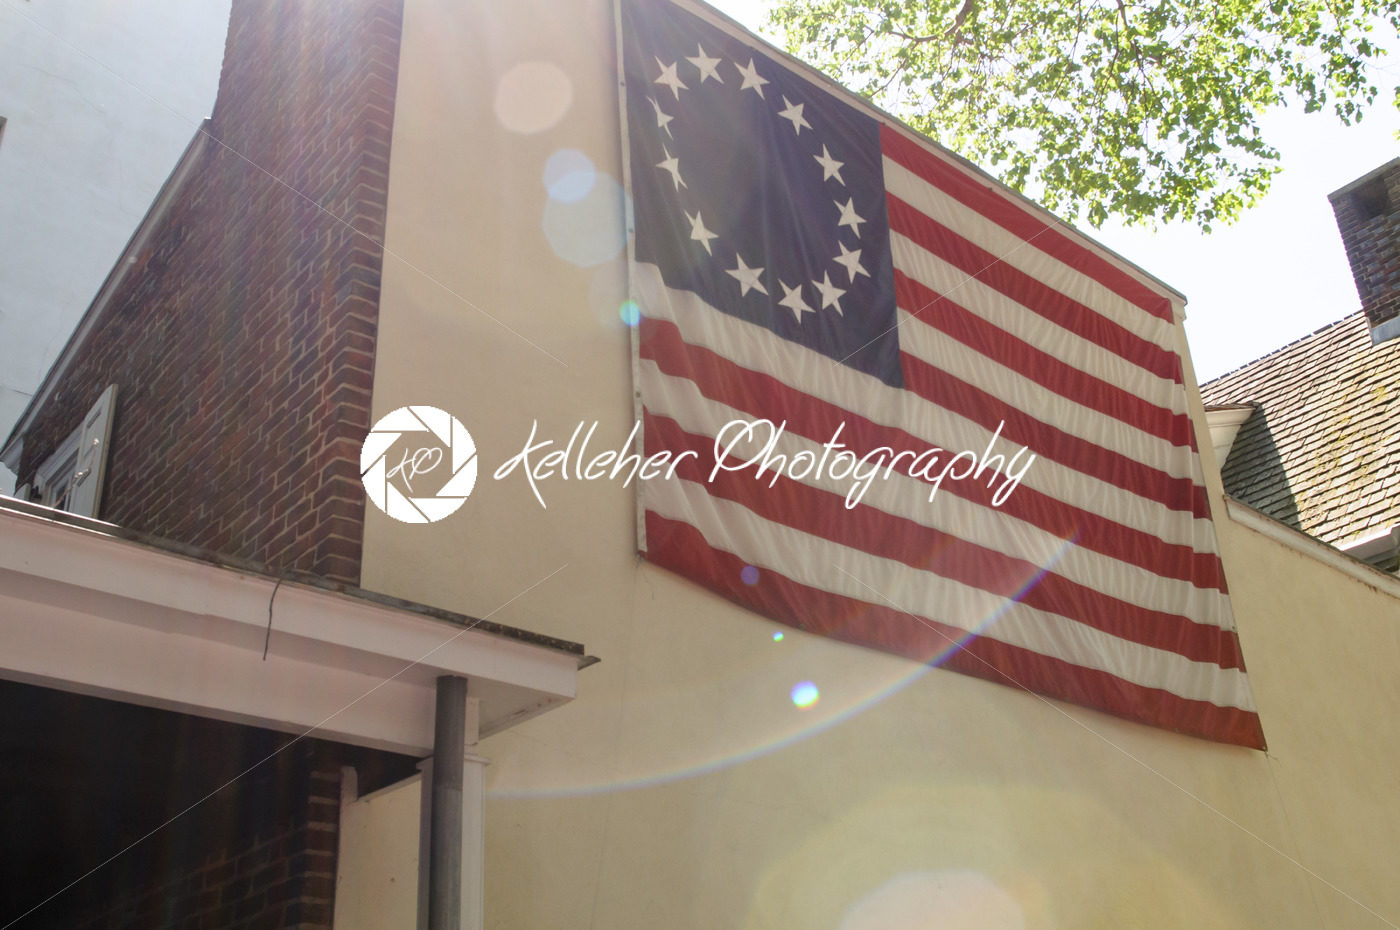 PHILADELPHIA, PA – MAY 14: American thirteen point historic flag often named the Betsy Ross flag, in front of the Betsy Ross House at 239 Arch Street on May 14, 2015 - Kelleher Photography Store